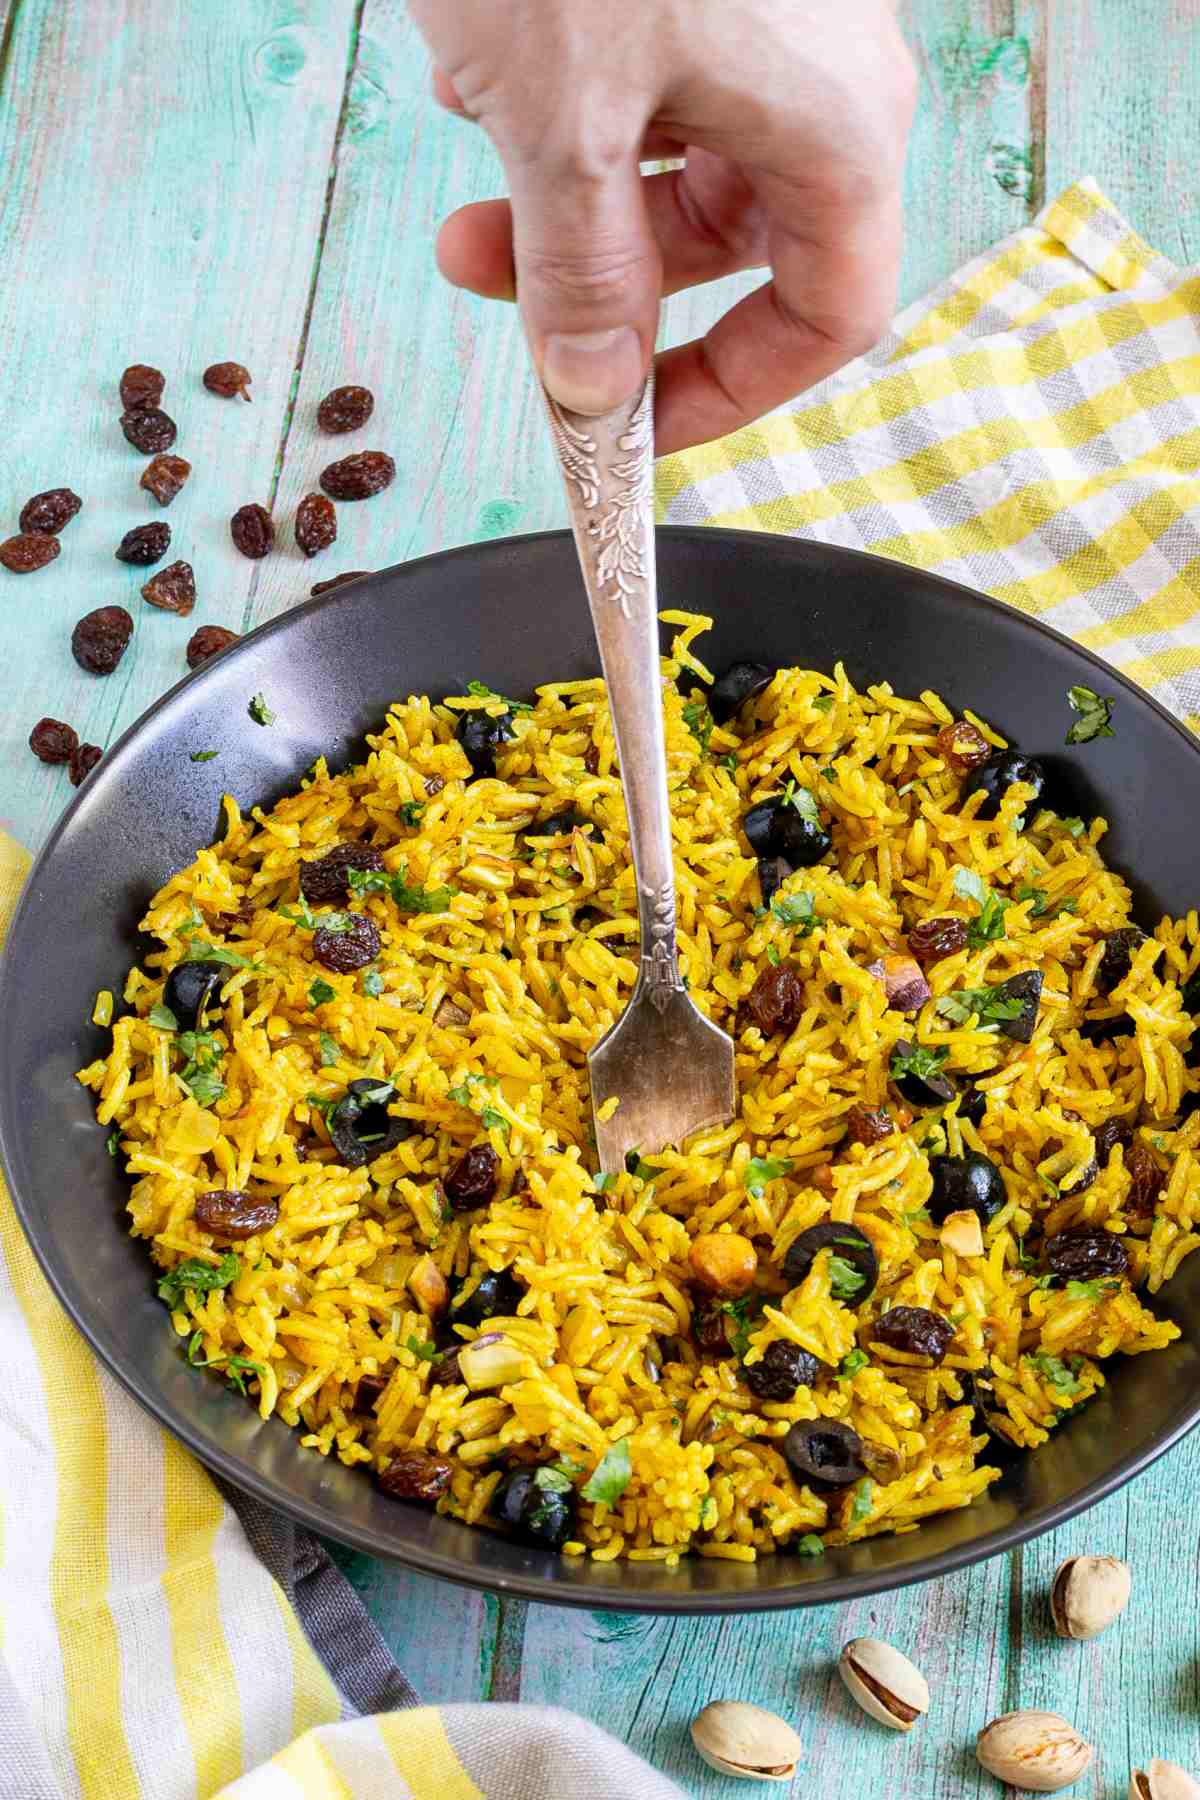 Yellow rice with raisins and pistachios and green herbs in a black bowl. A hand is holding a spoon to take some.